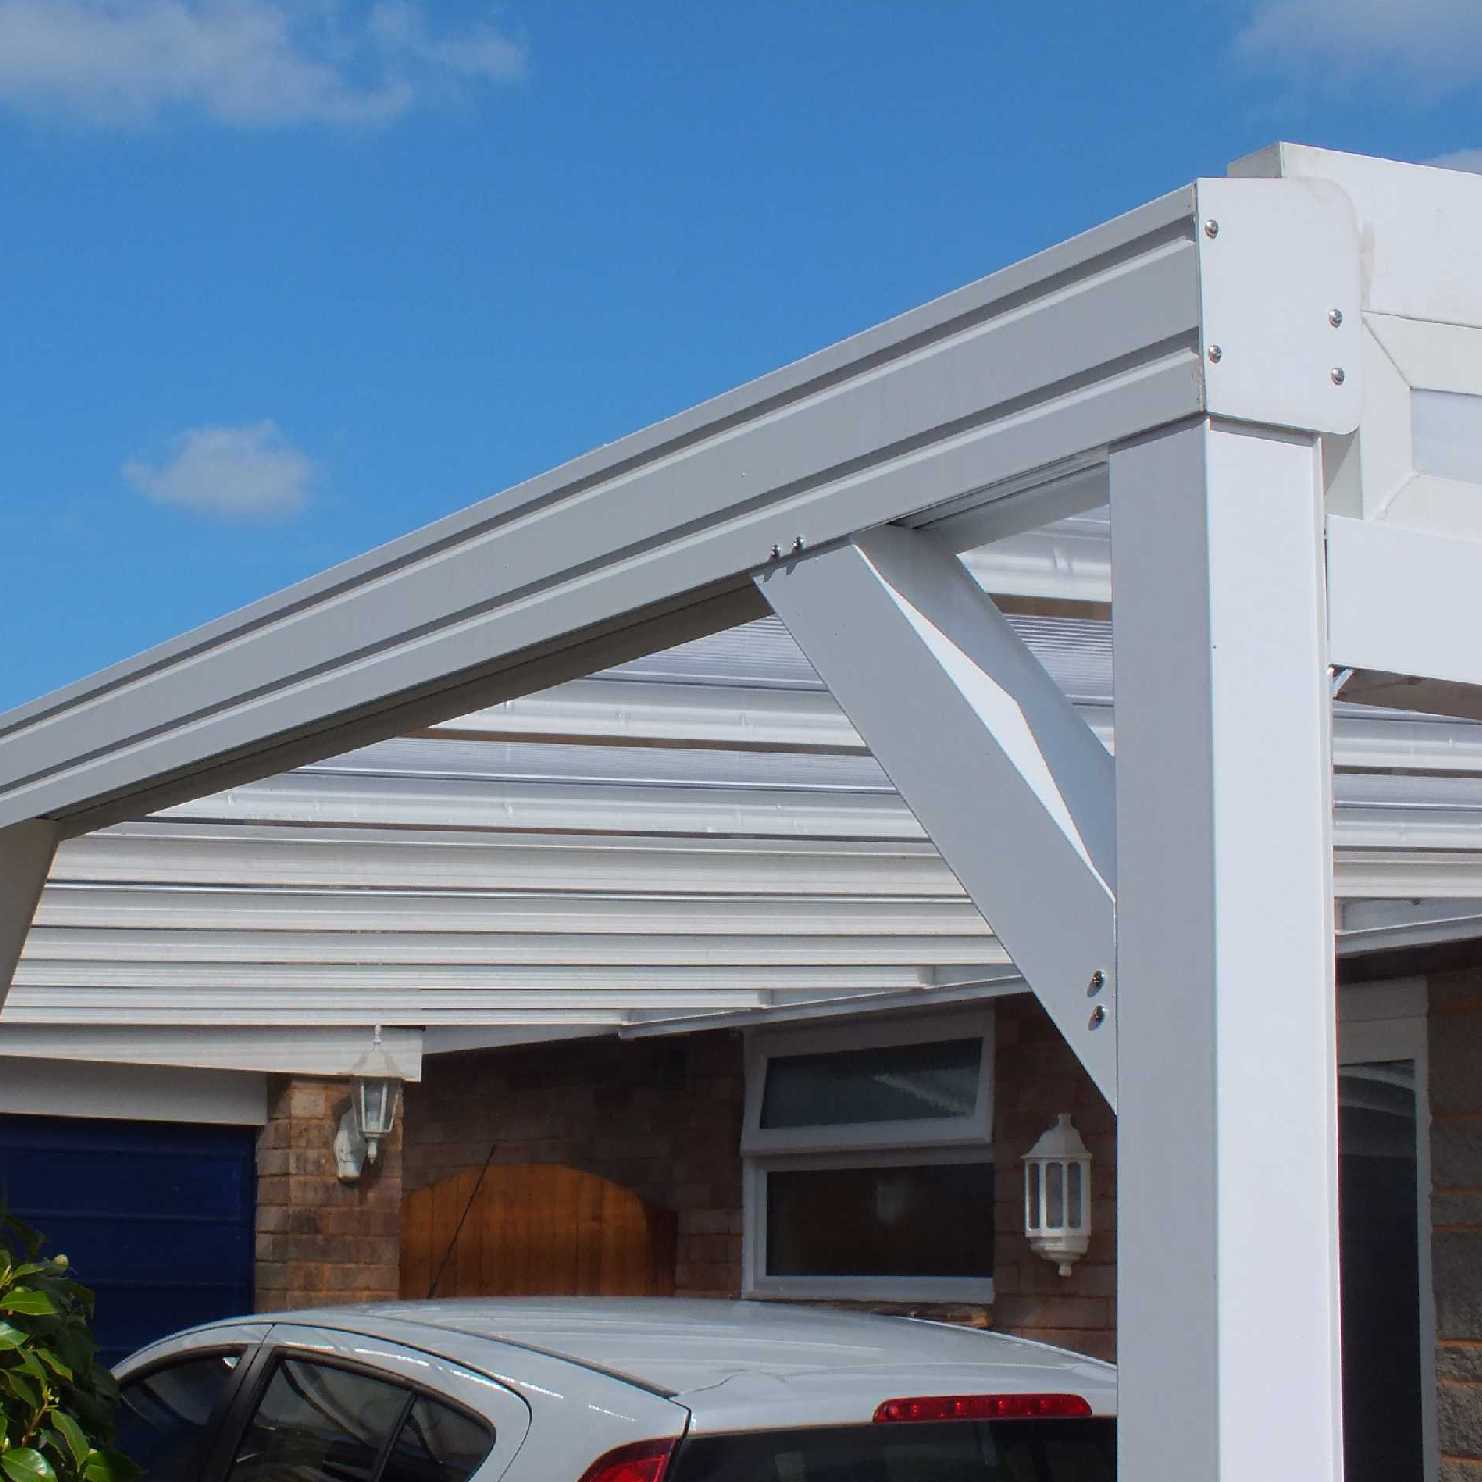 Buy Omega Smart Lean-To Canopy, White with 16mm Polycarbonate Glazing - 12.0m (W) x 2.5m (P), (5) Supporting Posts online today